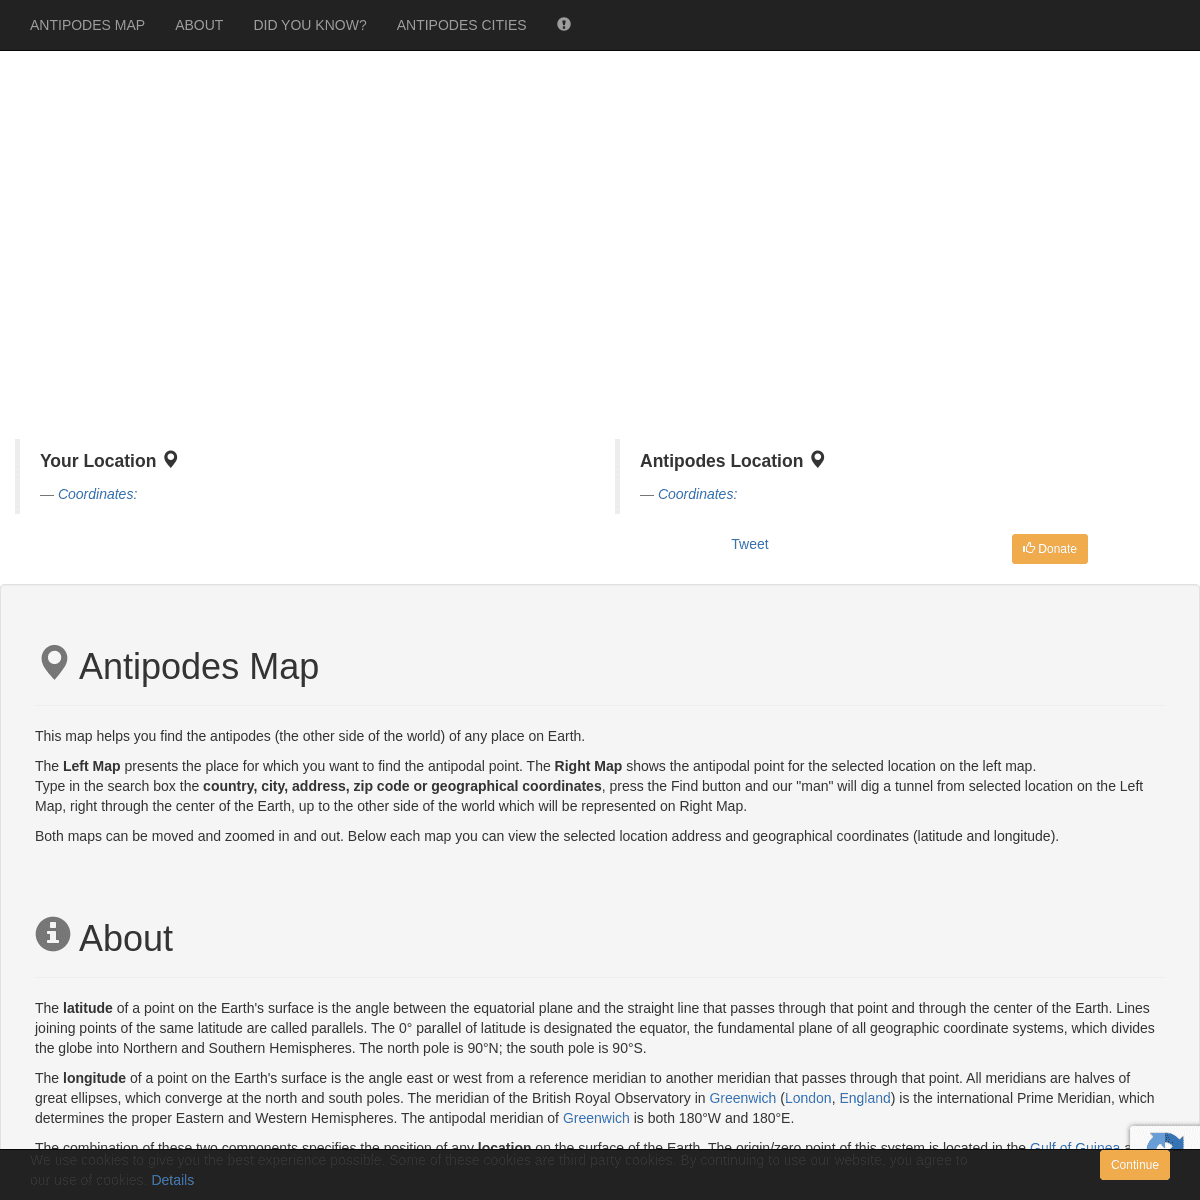 A complete backup of https://antipodesmap.com